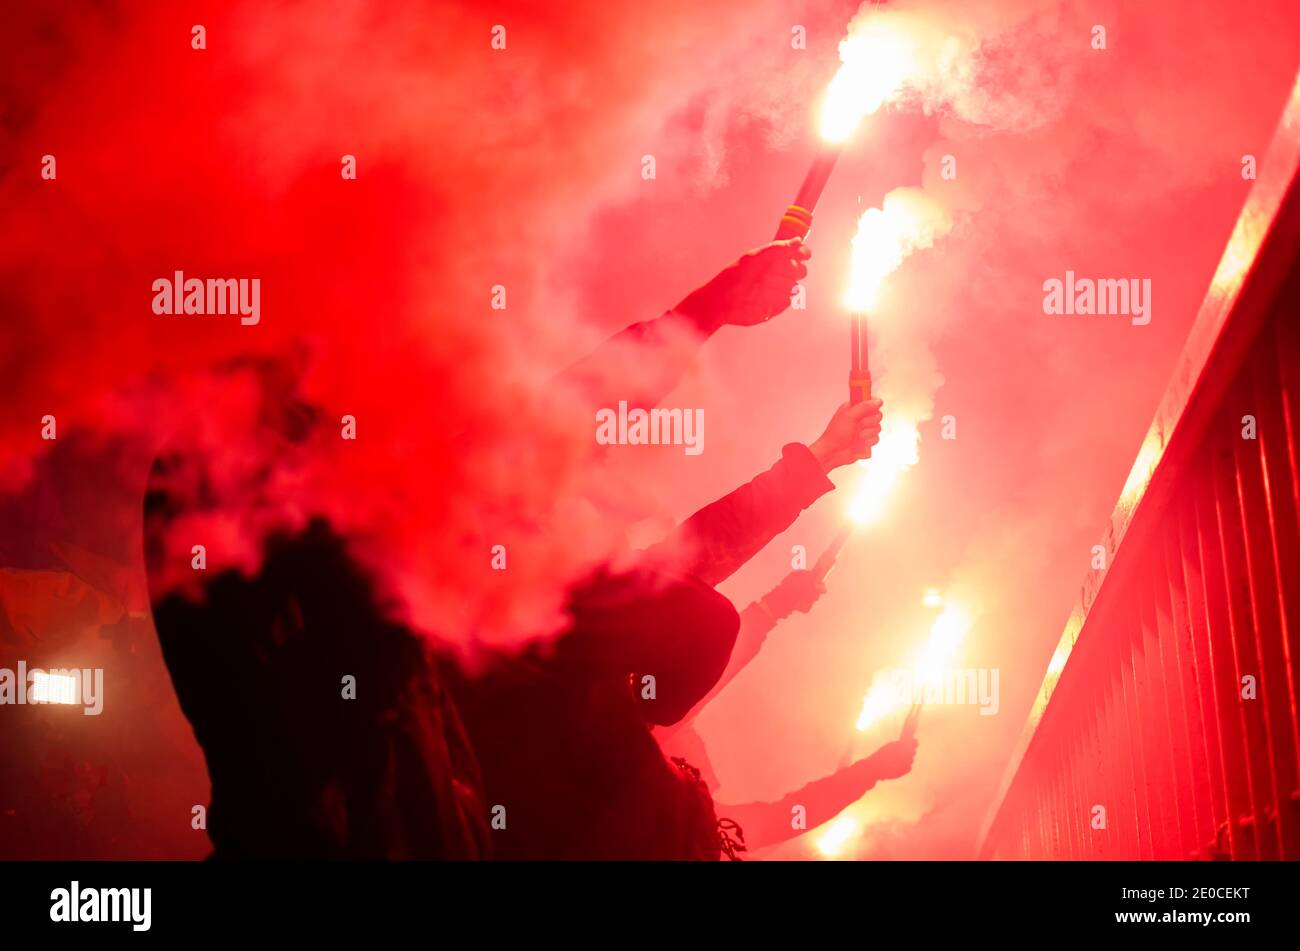 The protester is holding a fiery fire in his hands. Football fan burns fire Stock Photo